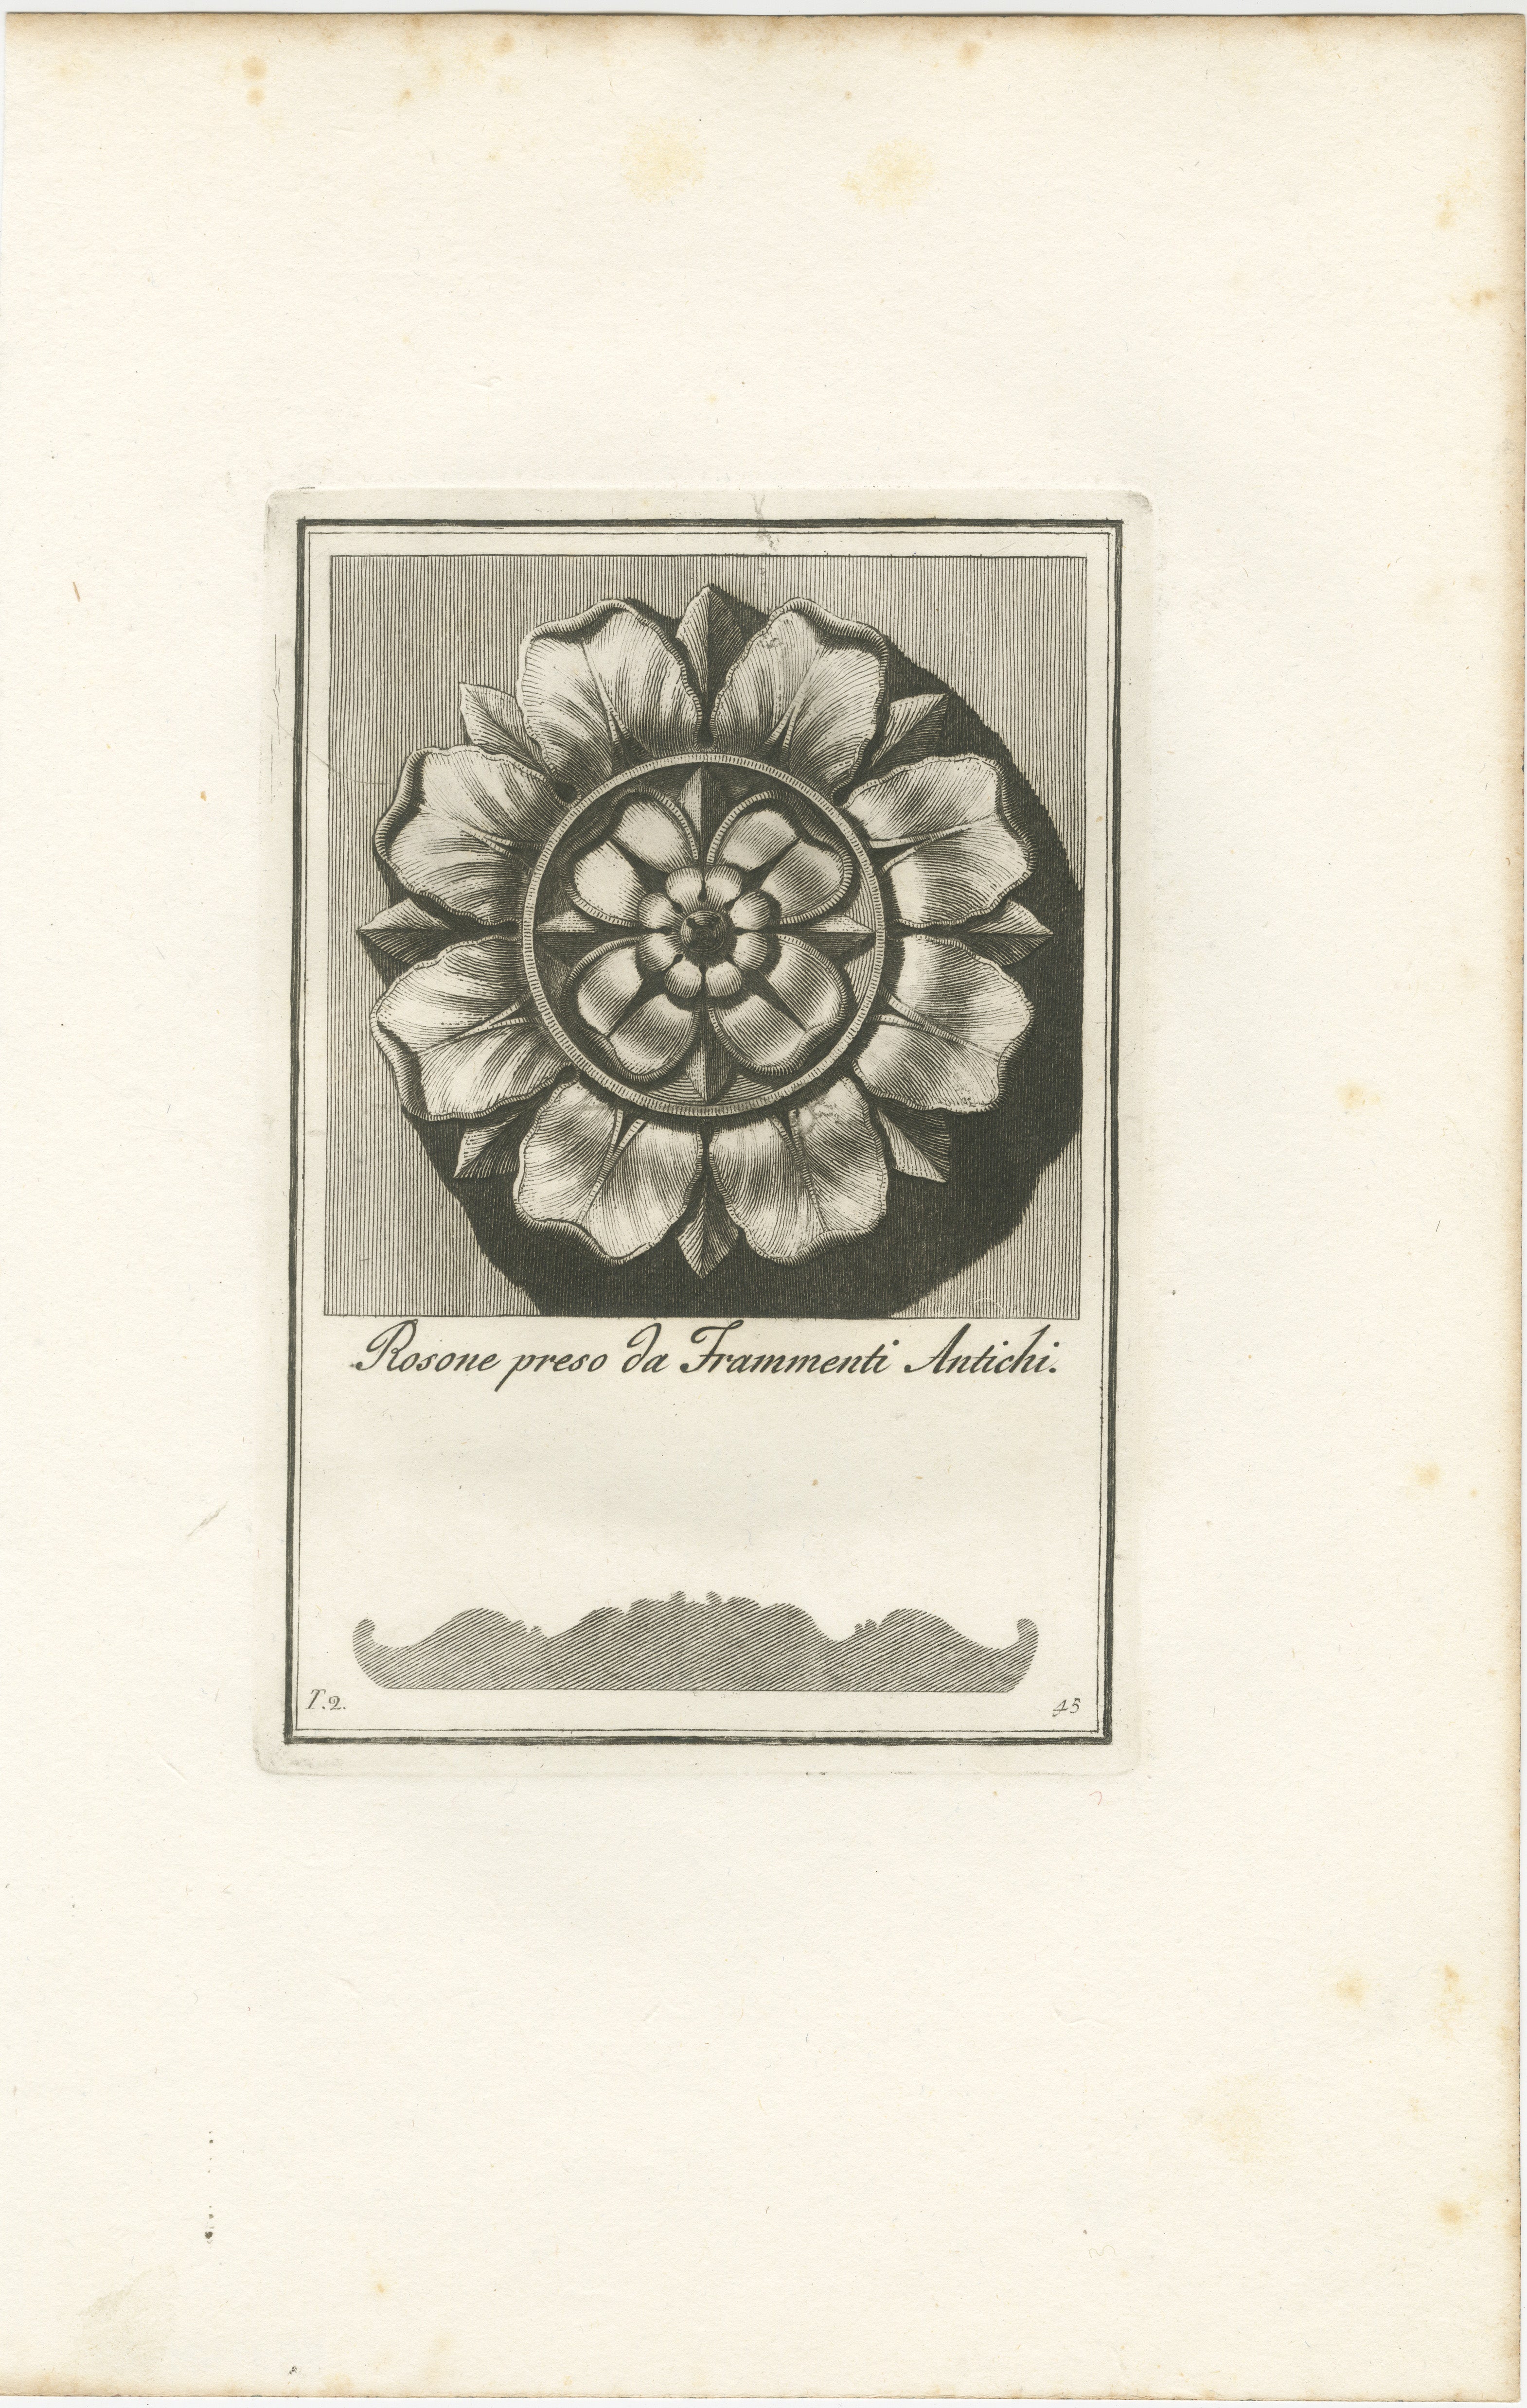 This image is an original architectural print depicting a rosette, a decorative motif fashioned after a stylized rose, commonly found in classical and neoclassical architecture. The print is labeled 